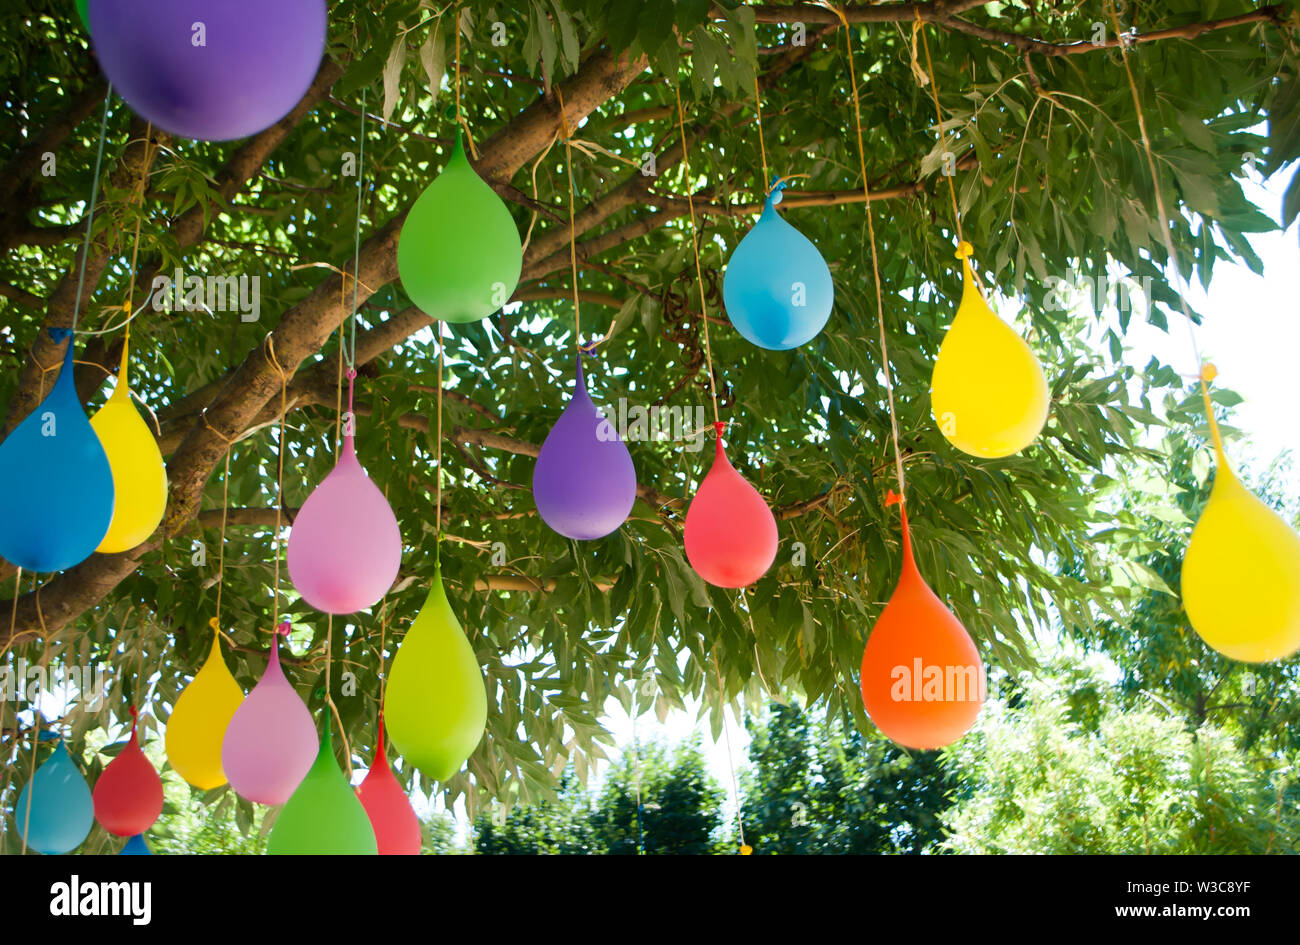 Multicolored balloons filled with water, hanging on a tree, with green  color of leaves in the background Stock Photo - Alamy